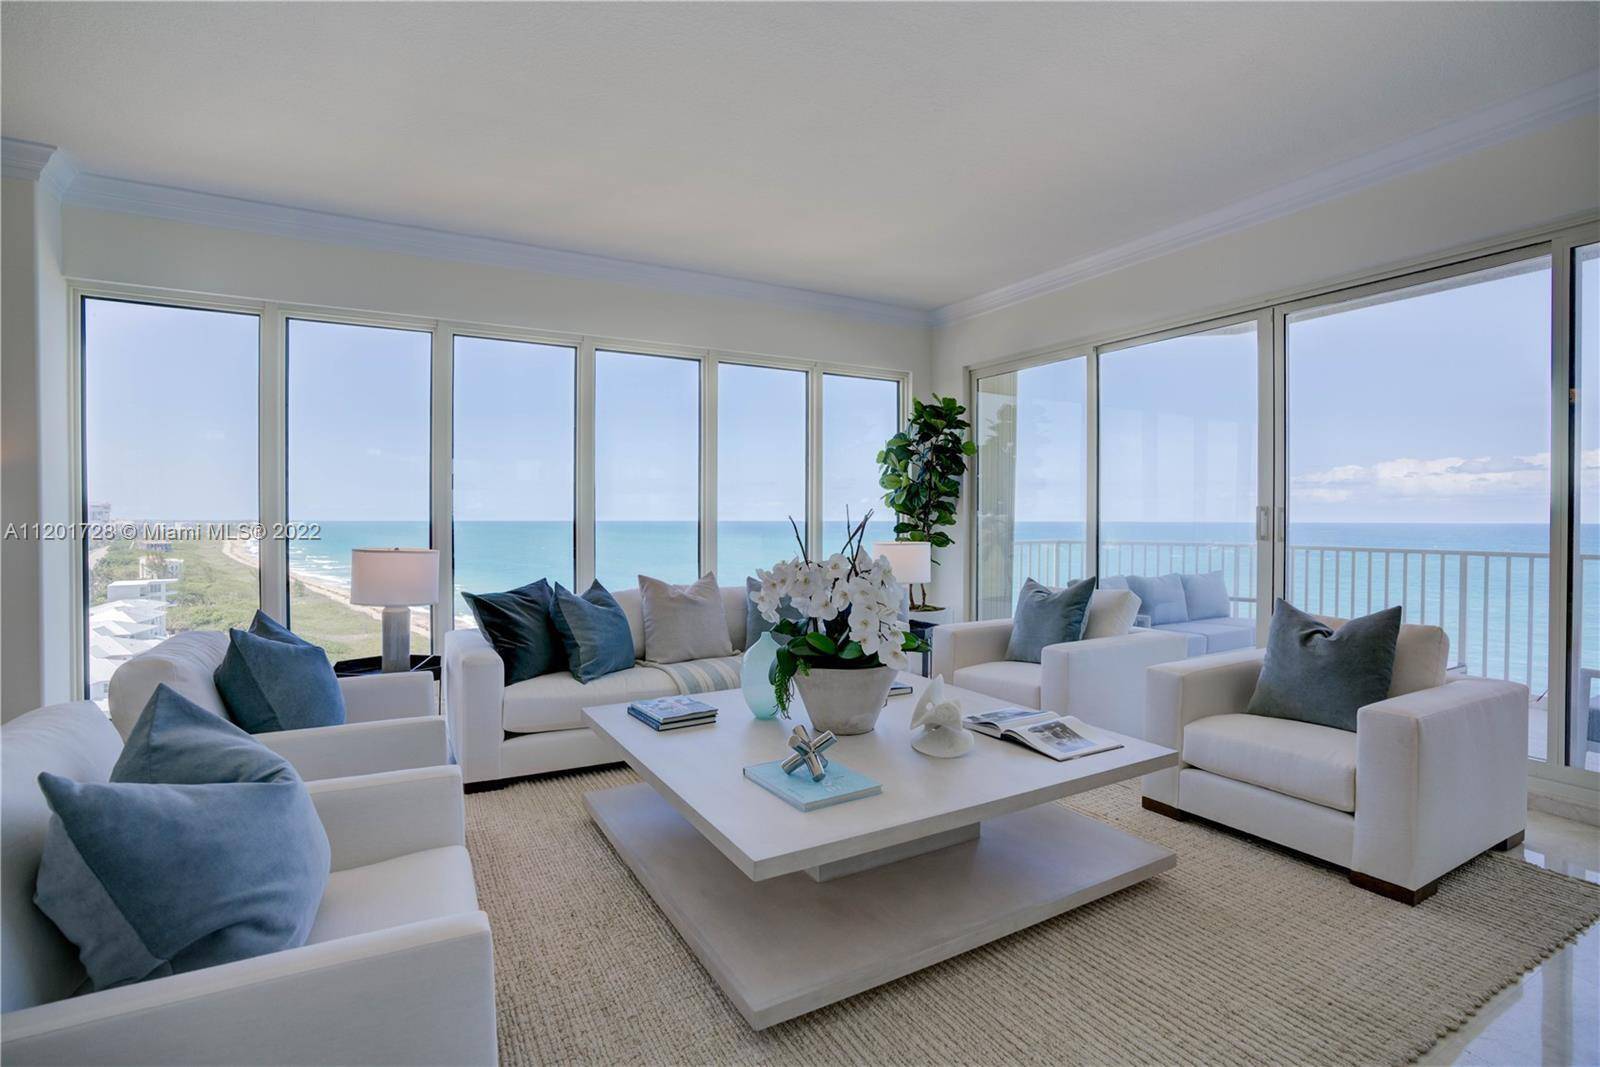 The entire penthouse floor, first time being offered for sale with spectacular direct ocean views, 2 units, 6 bedrooms, 9 bathrooms, 6 car enclosed garages and a private cabana, over ...